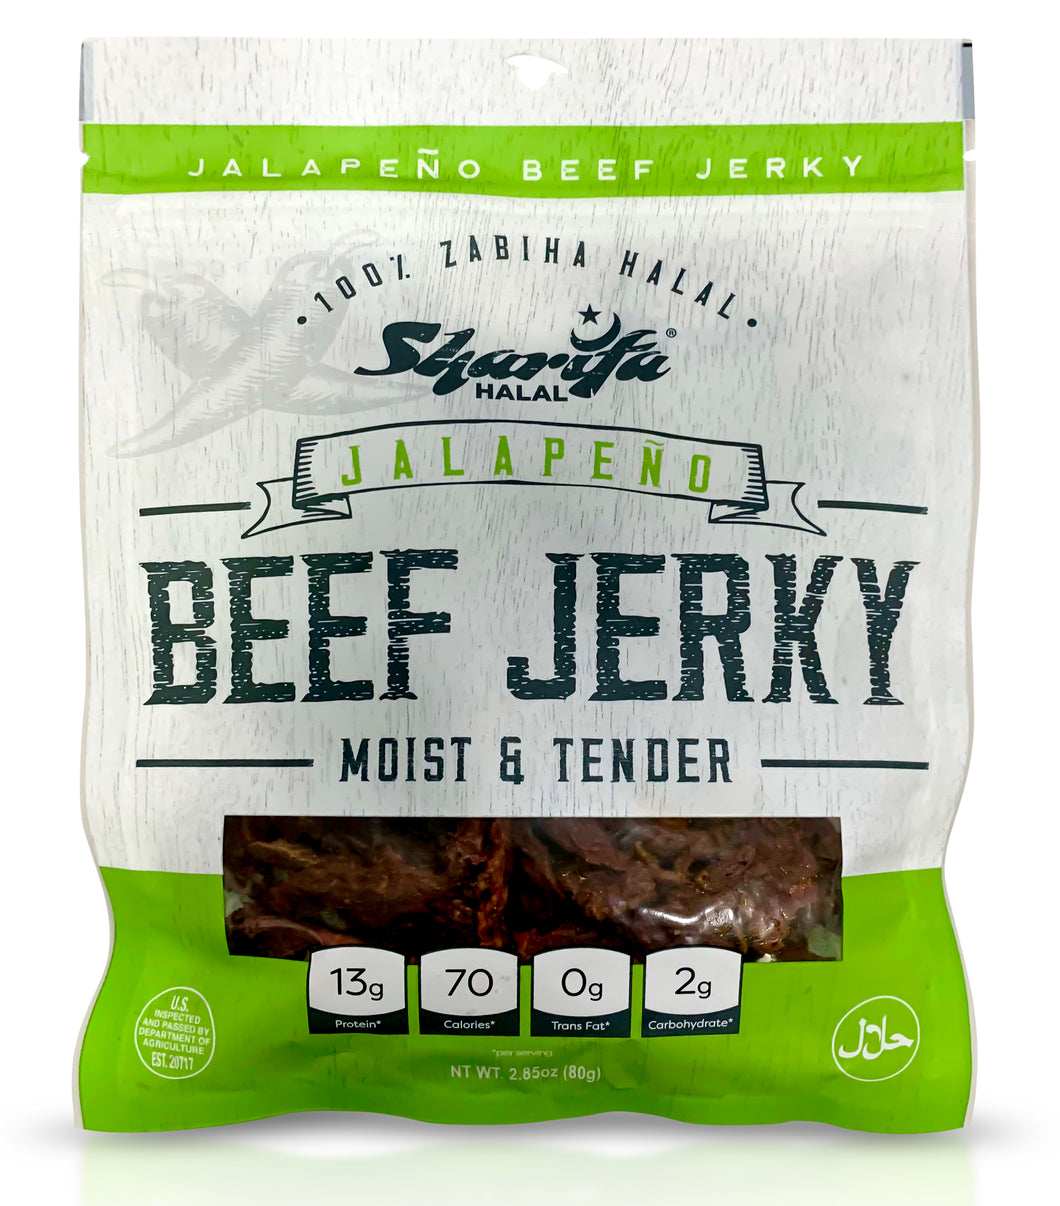 Sharifa Halal Beef Jerky, Jalapeno, (1) 2.85 oz. Bag – Great Everyday Halal Jerky Beef Meat Snack, 100 % Real Zabiha Halal Beef, 13g of Protein, 70 Calories, 0g Trans Fat, & 2g of Carbohydrates